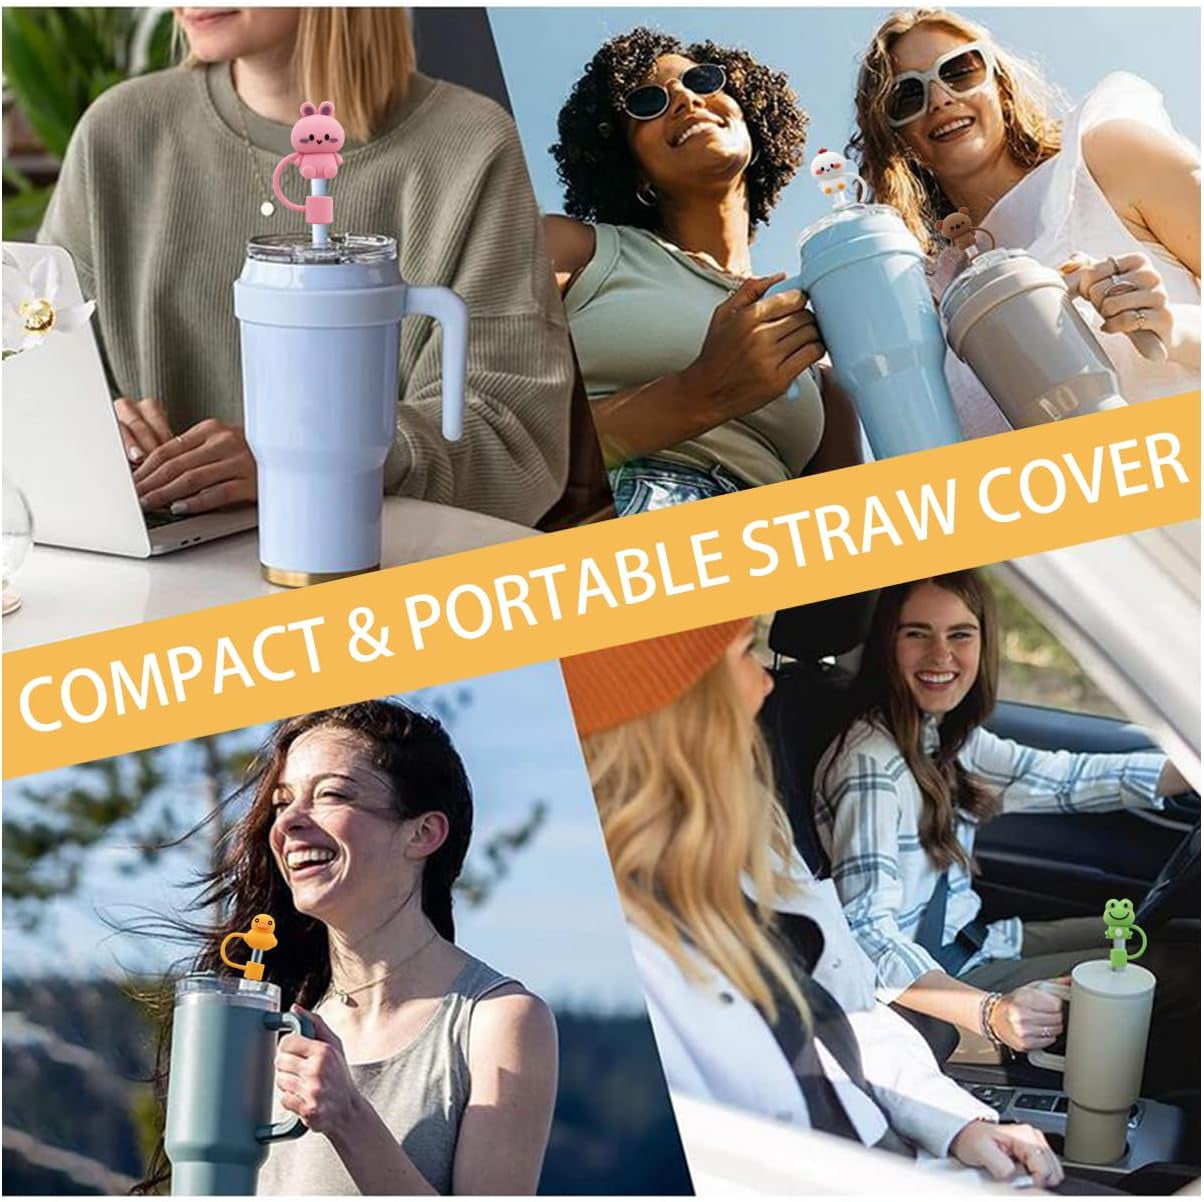 5PCS Straw Cover Cap for Stanley Cup, 10mm Flower Straw Cover fit Stanley  20&30&40 Oz Tumbler with Handle, Straw Toppers for Stanley Cups Accessories